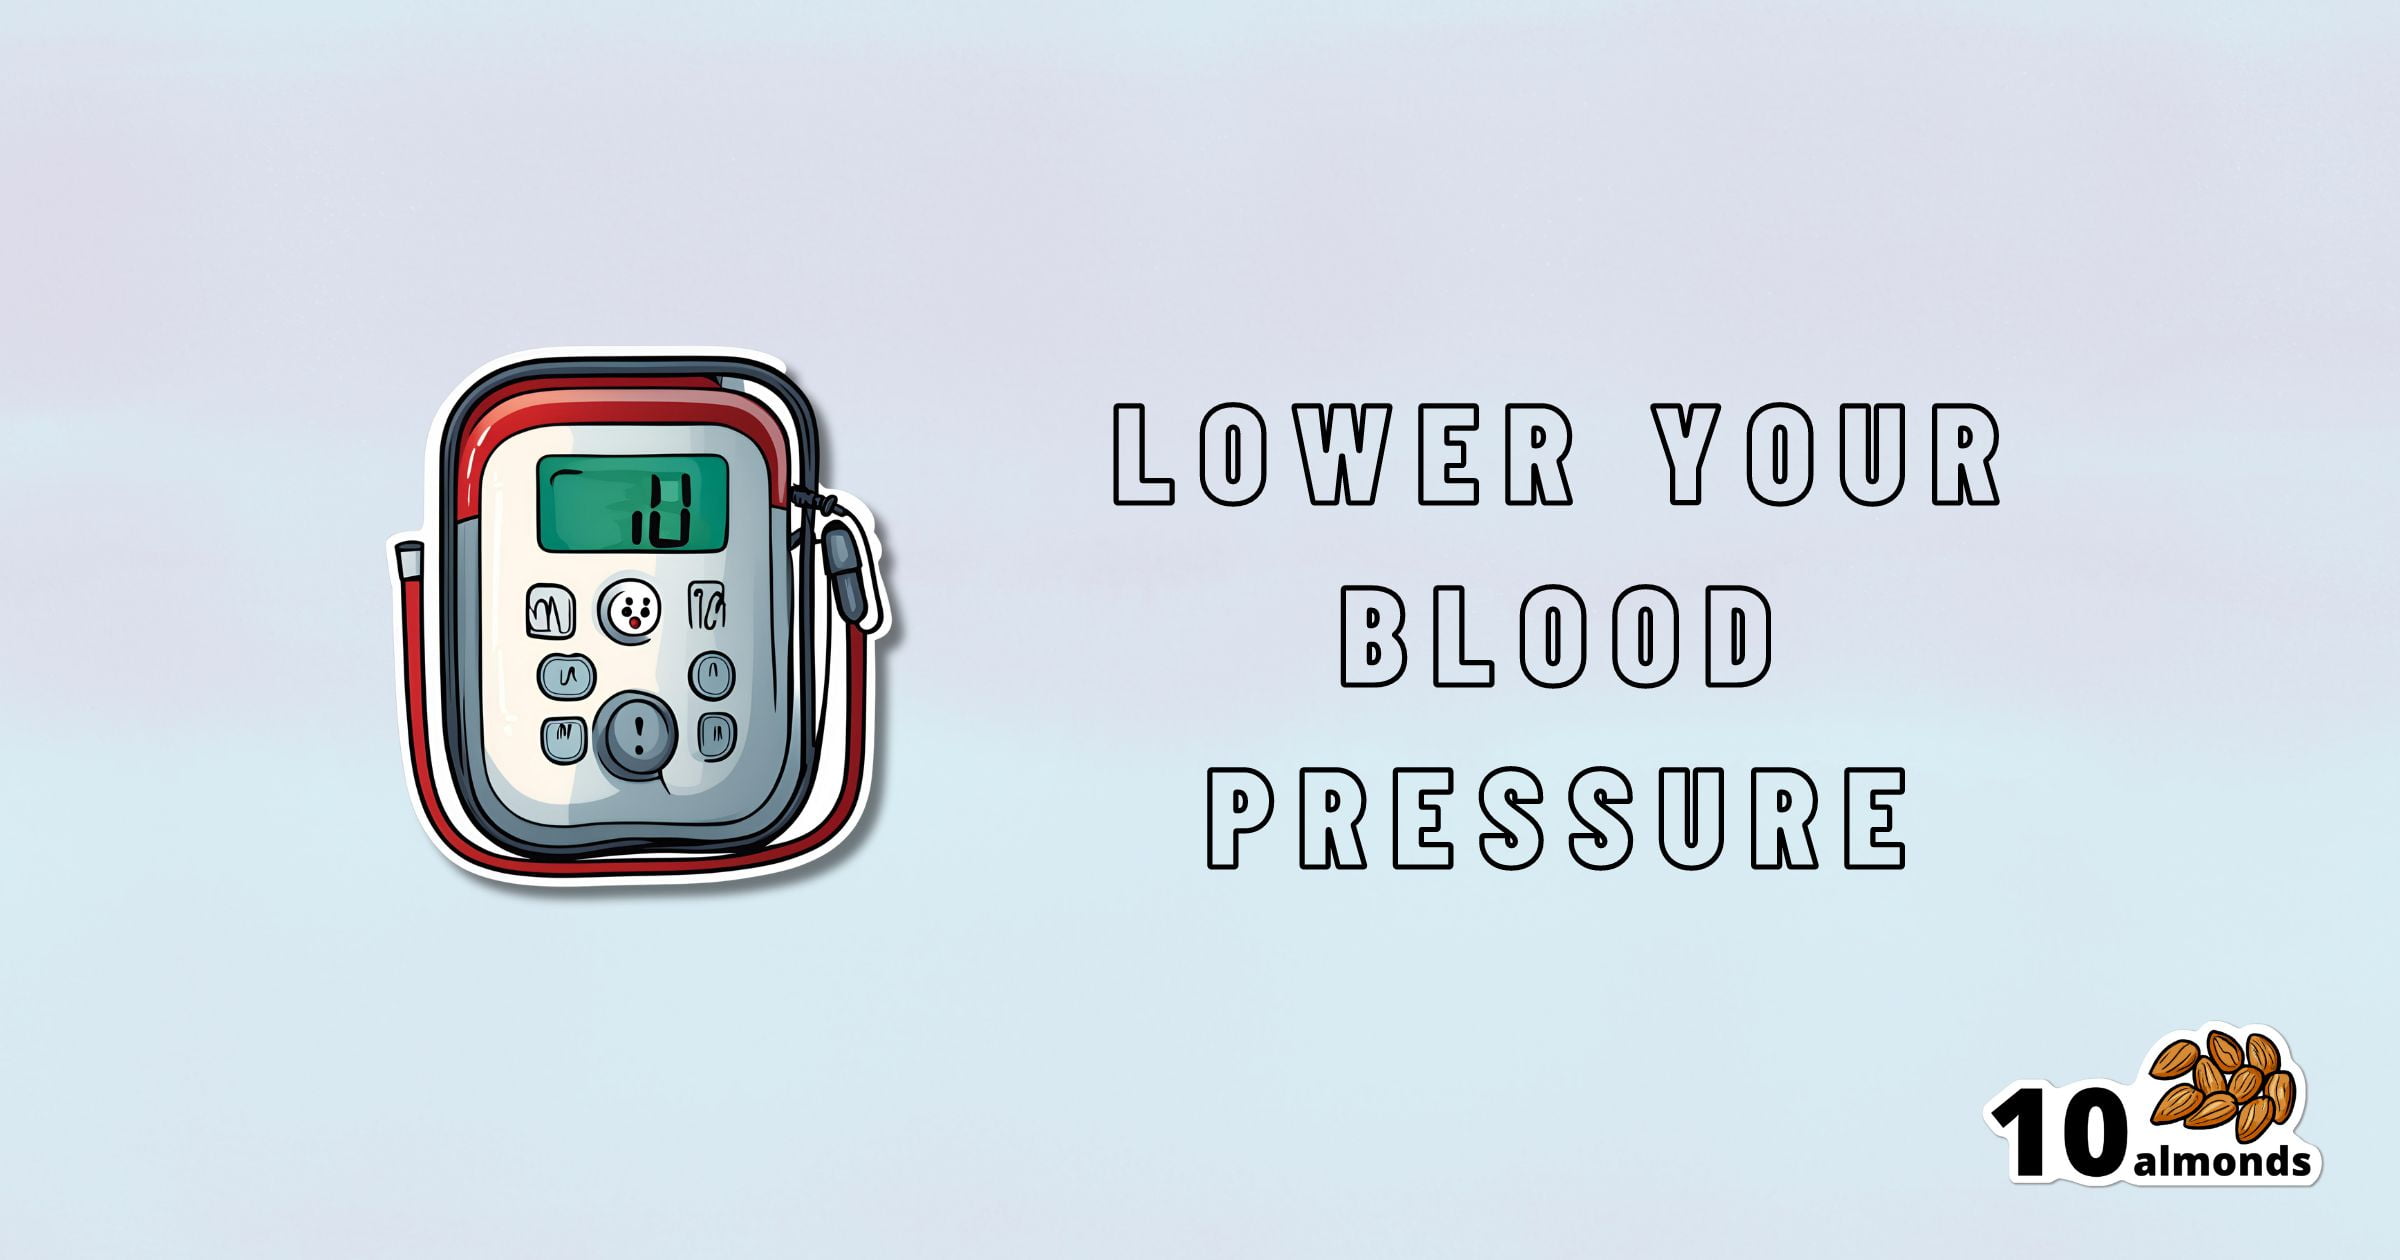 A digital blood pressure monitor is displayed on the left side of the image beside the text "LOWER YOUR BLOOD PRESSURE," a message often emphasized by cardiologists. At the bottom right corner, there are 10 almonds and the text "10 almonds.